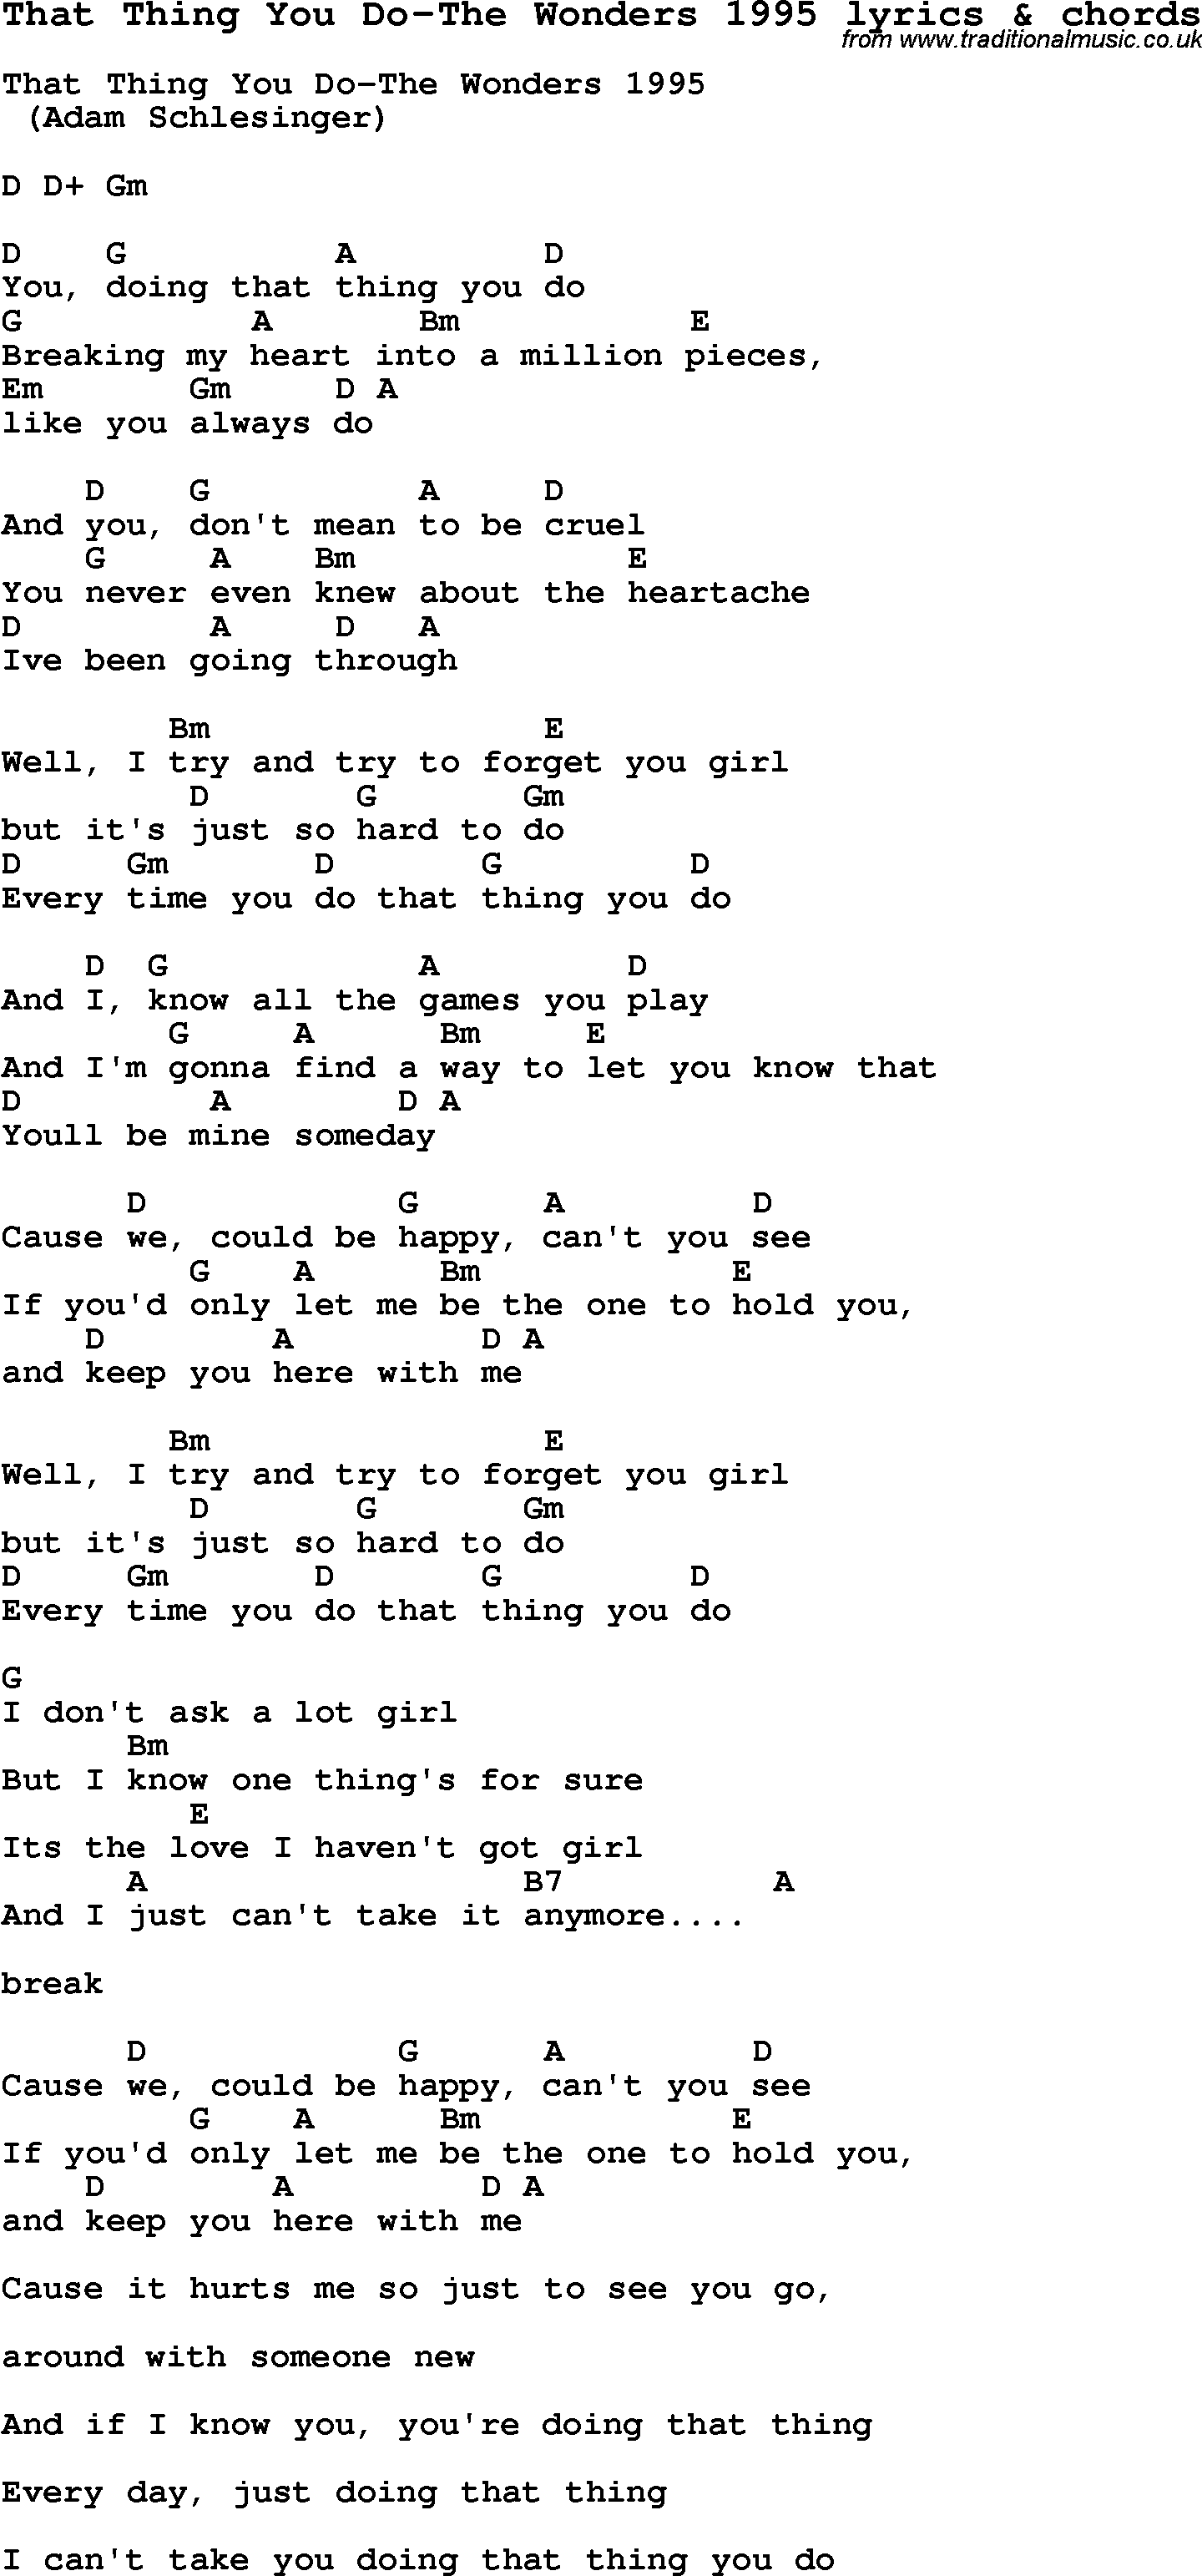 Love Song Lyrics for: That Thing You Do-The Wonders 1995 with chords for Ukulele, Guitar Banjo etc.